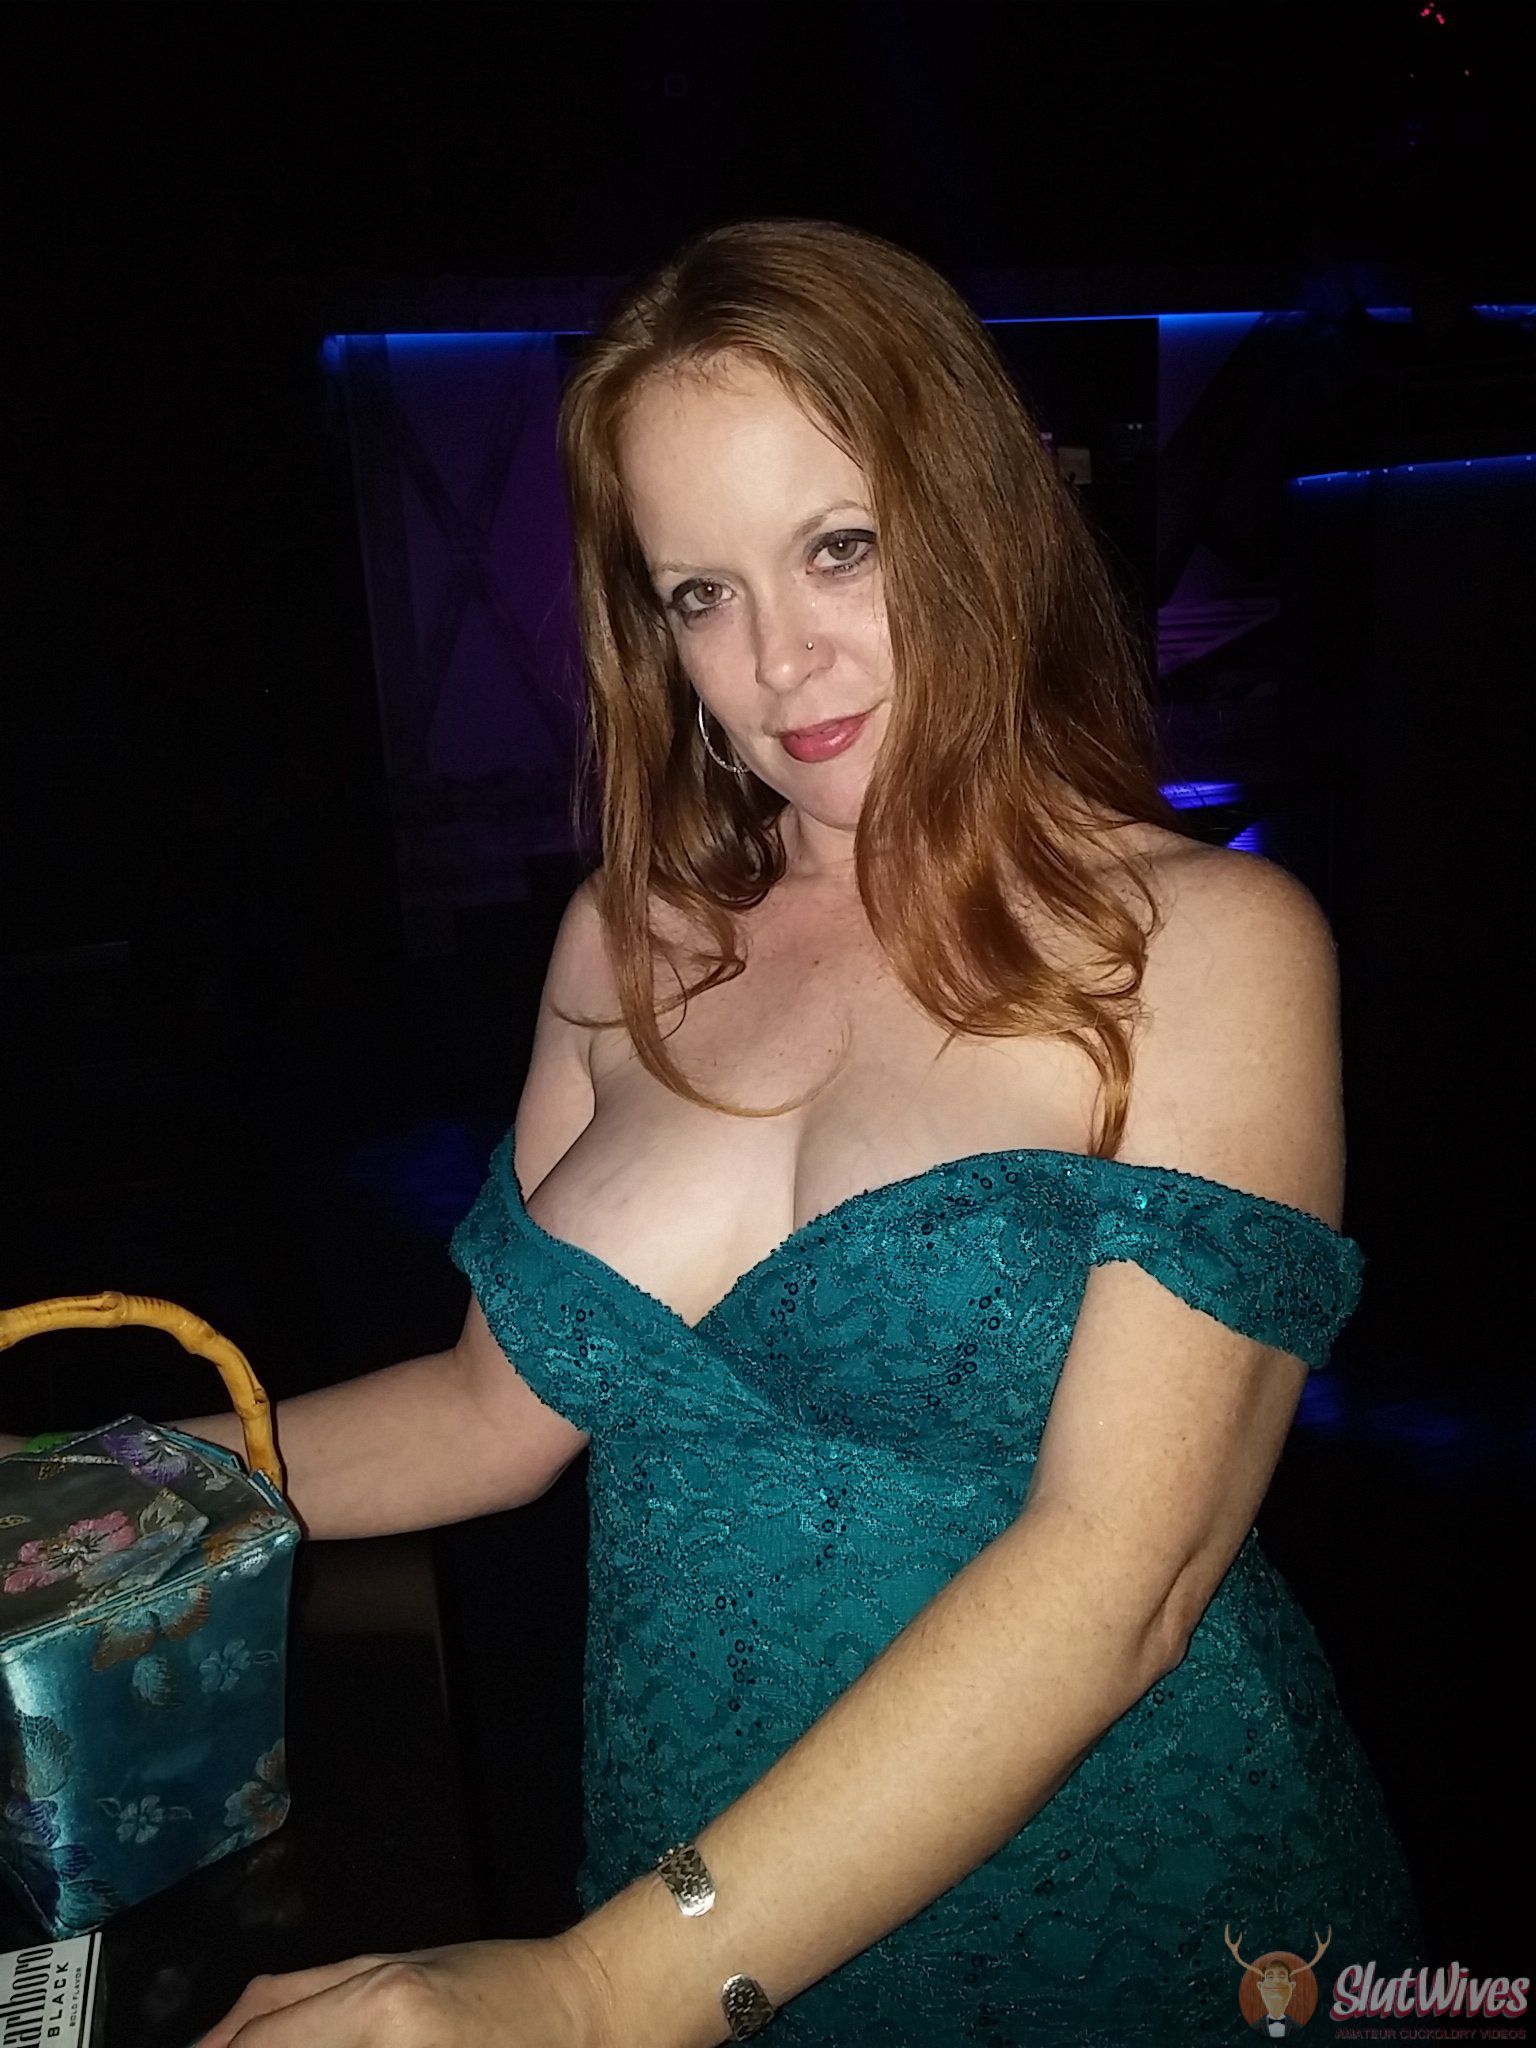 Tits falling out at the bar Slutwives image photo